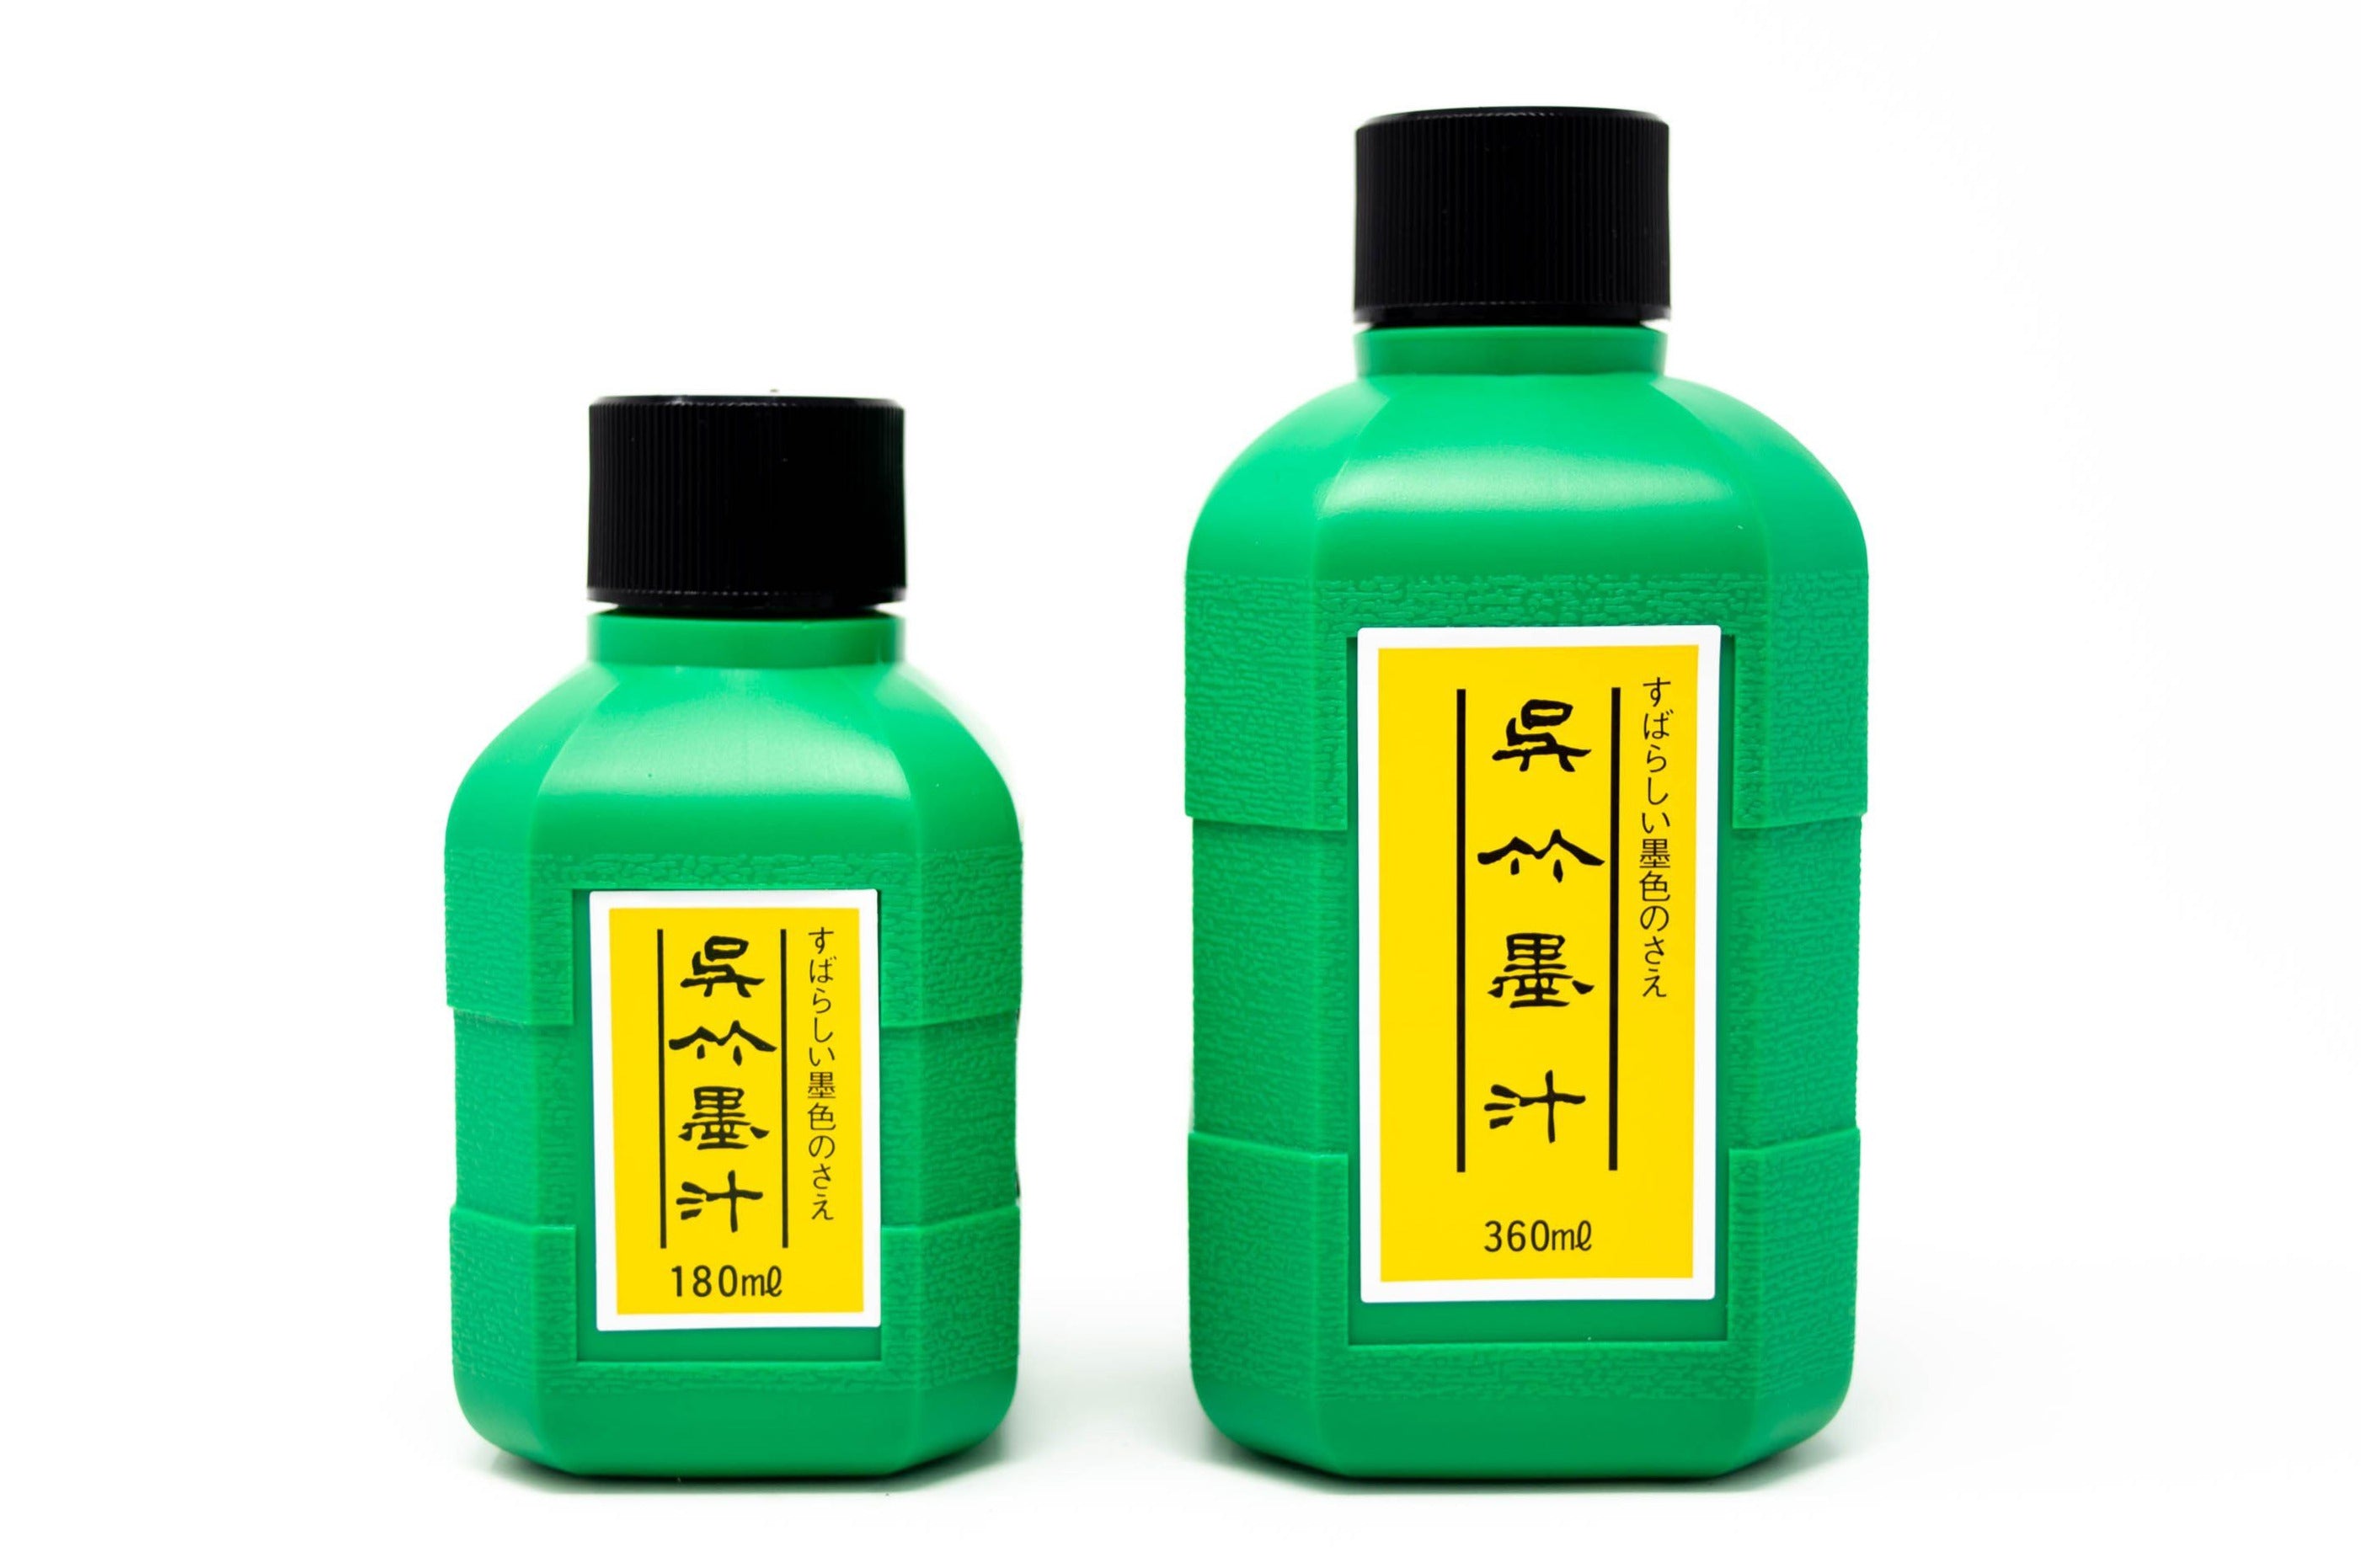 Chinese Calligraphy Bottle Liquid Ink Sumi Calligraphy Liquid Ink 180ml  Bottle Black Ink 